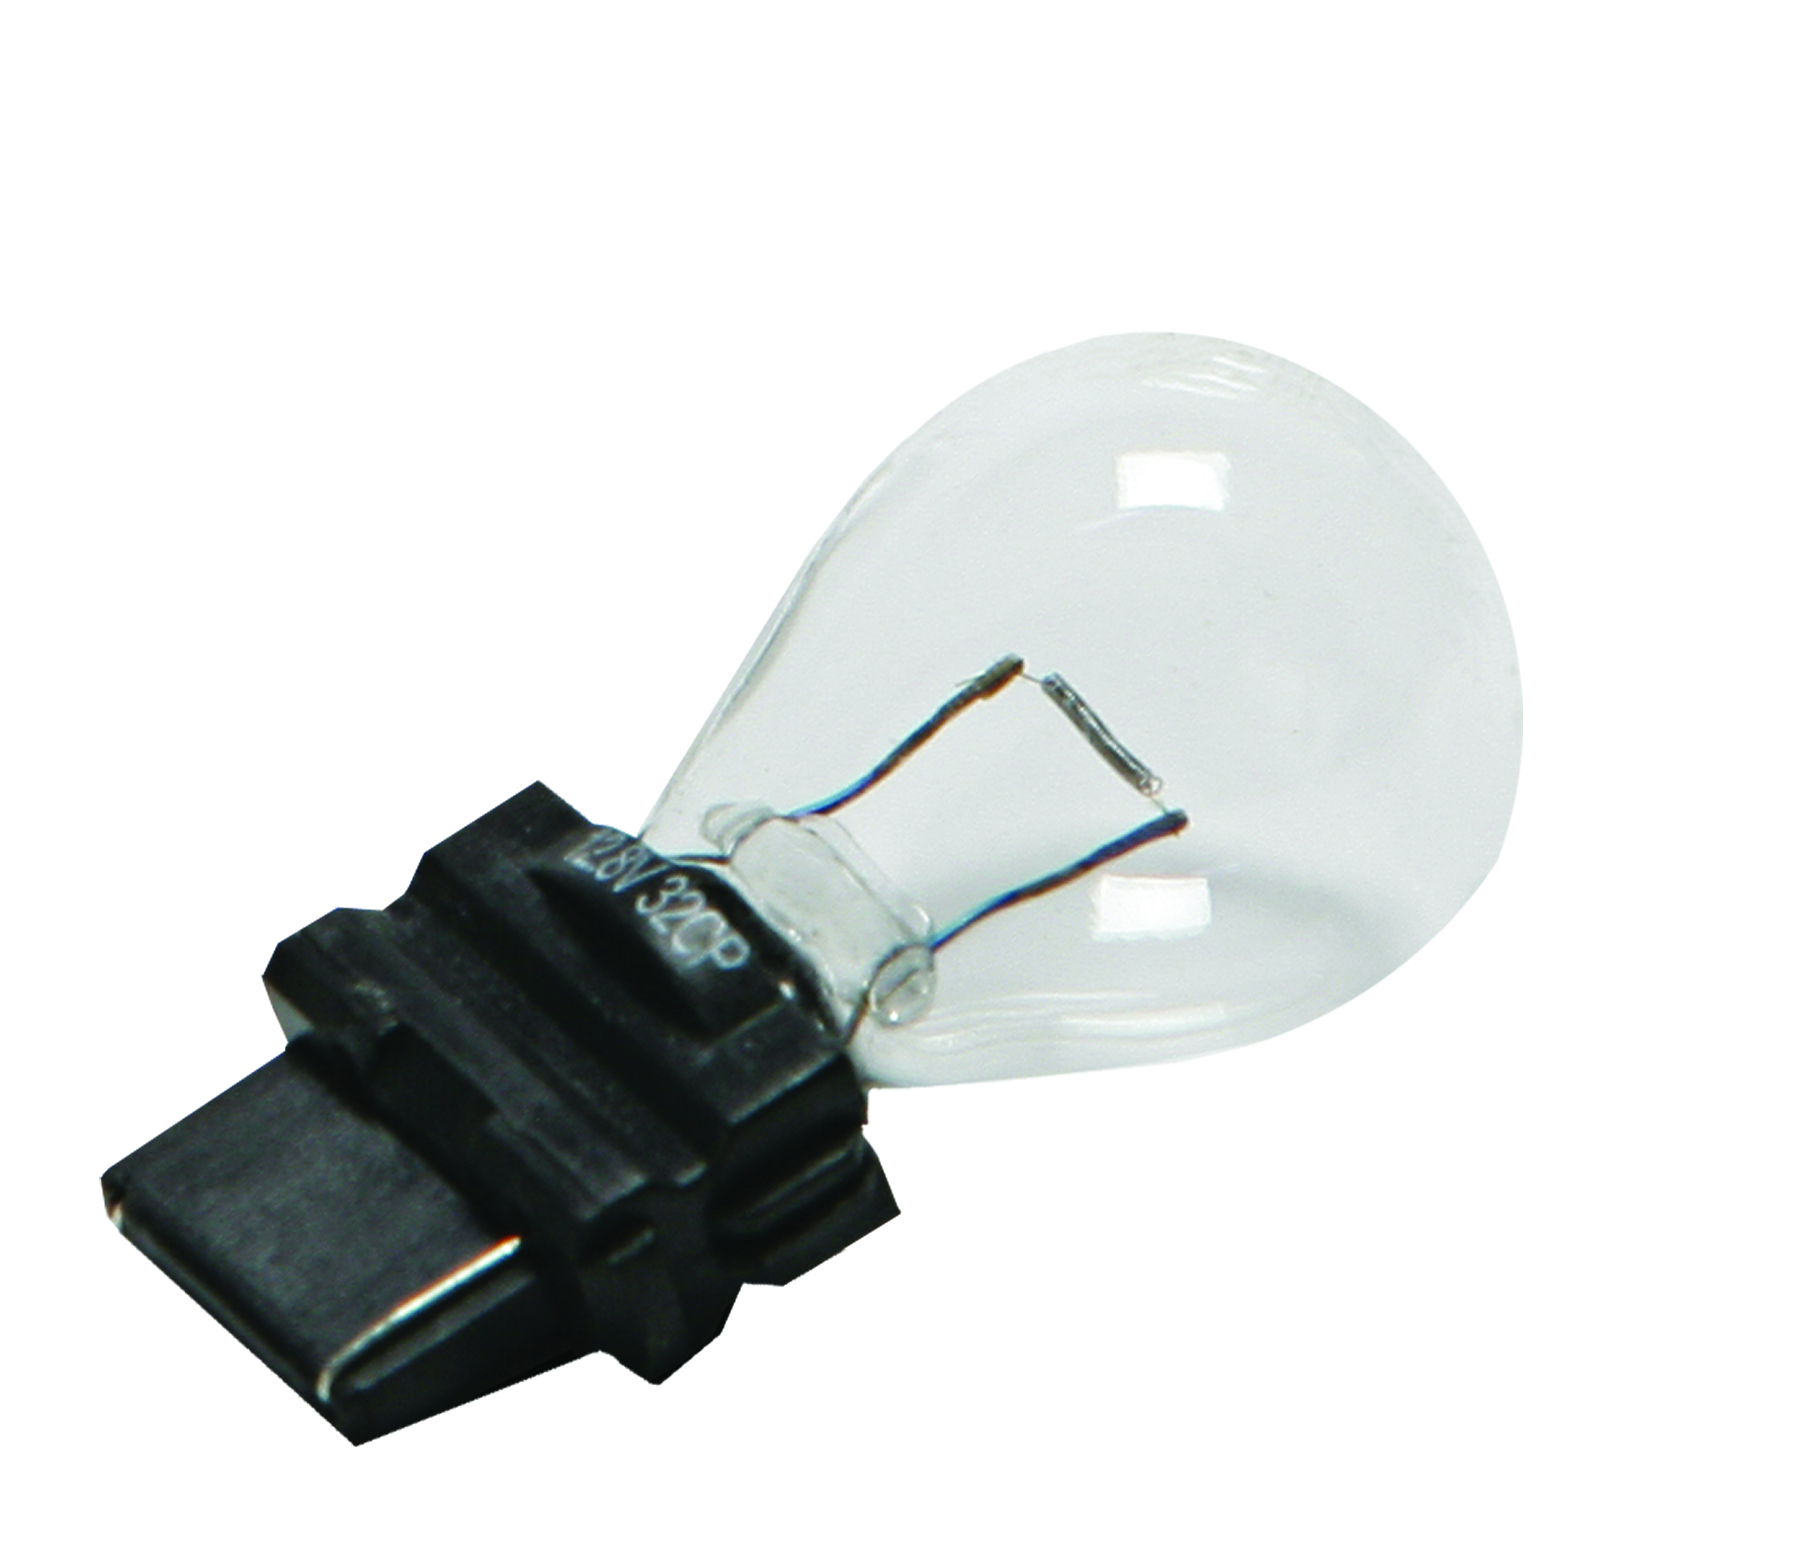 2.10A S8 PLASTIC 12V WEDGE